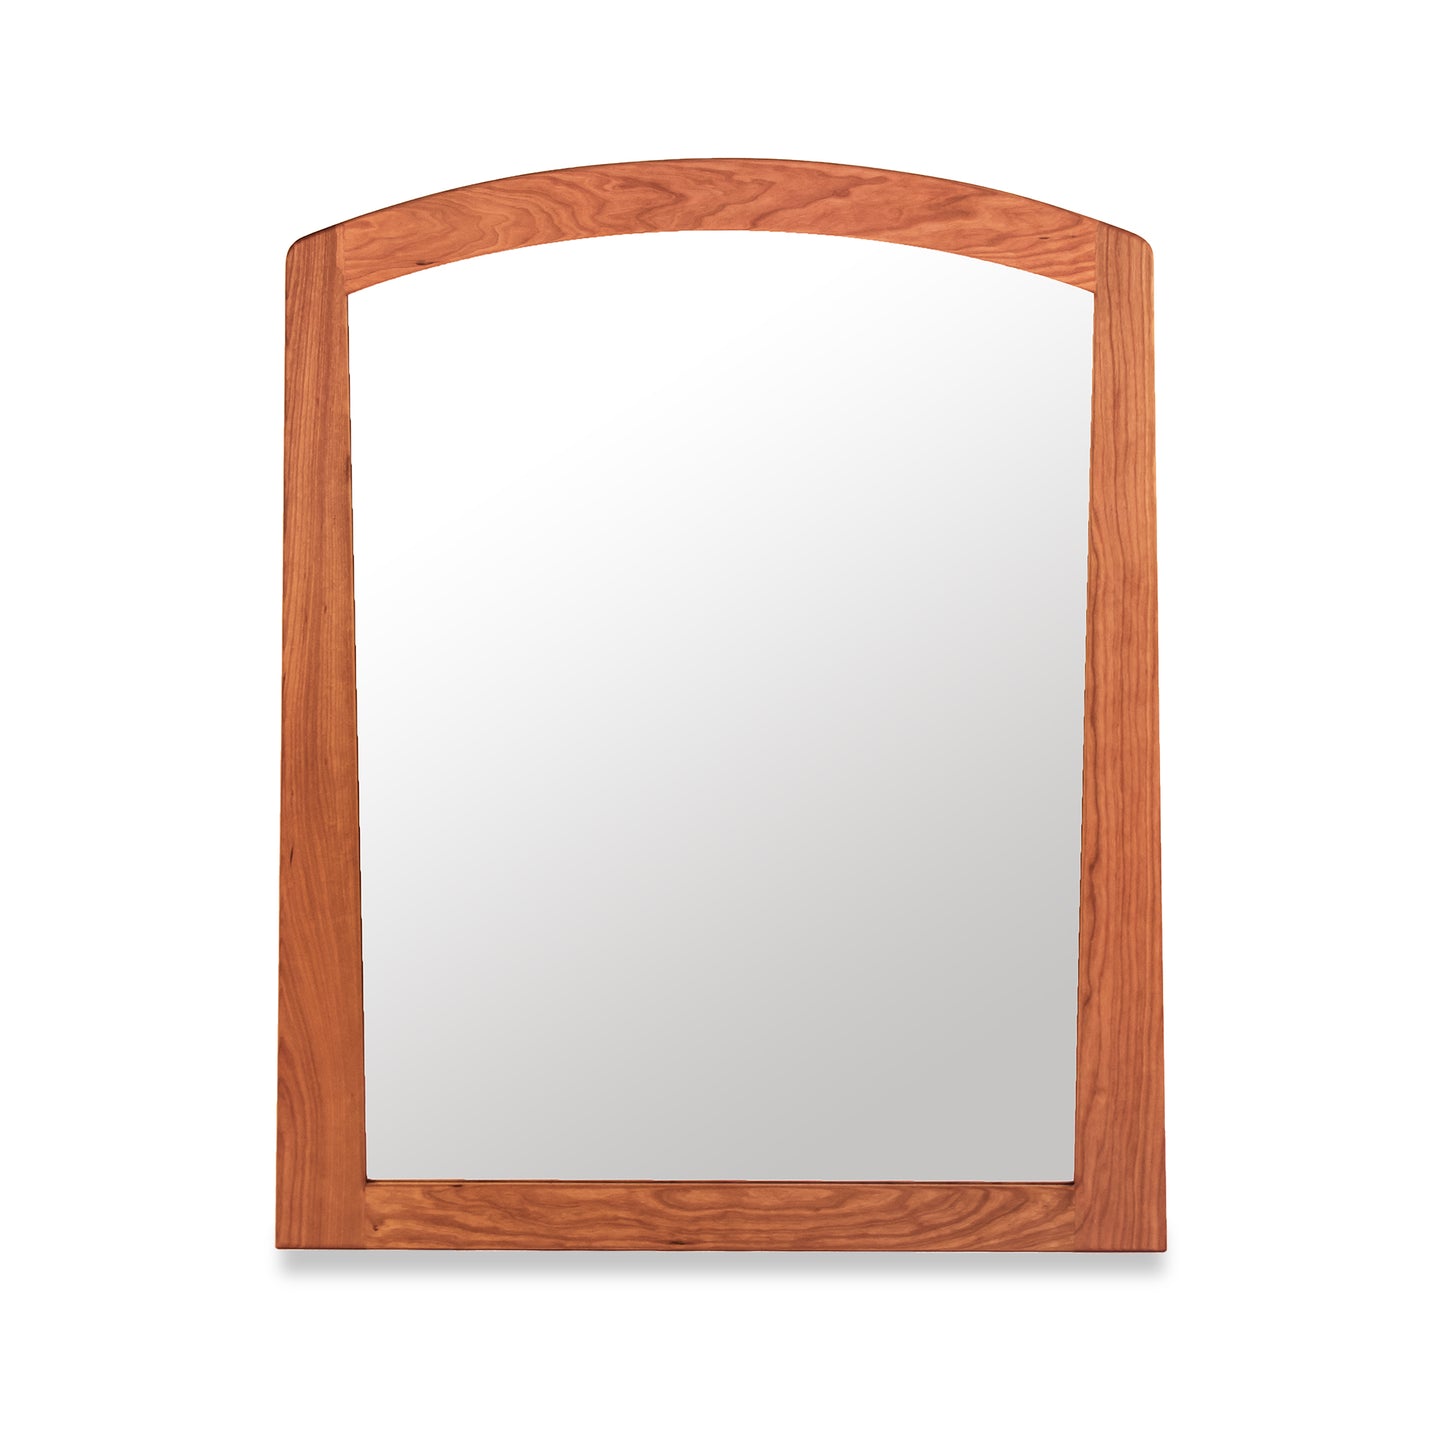 A Cherry Moon Vertical Mirror with a hardwood frame on a white background from Maple Corner Woodworks.